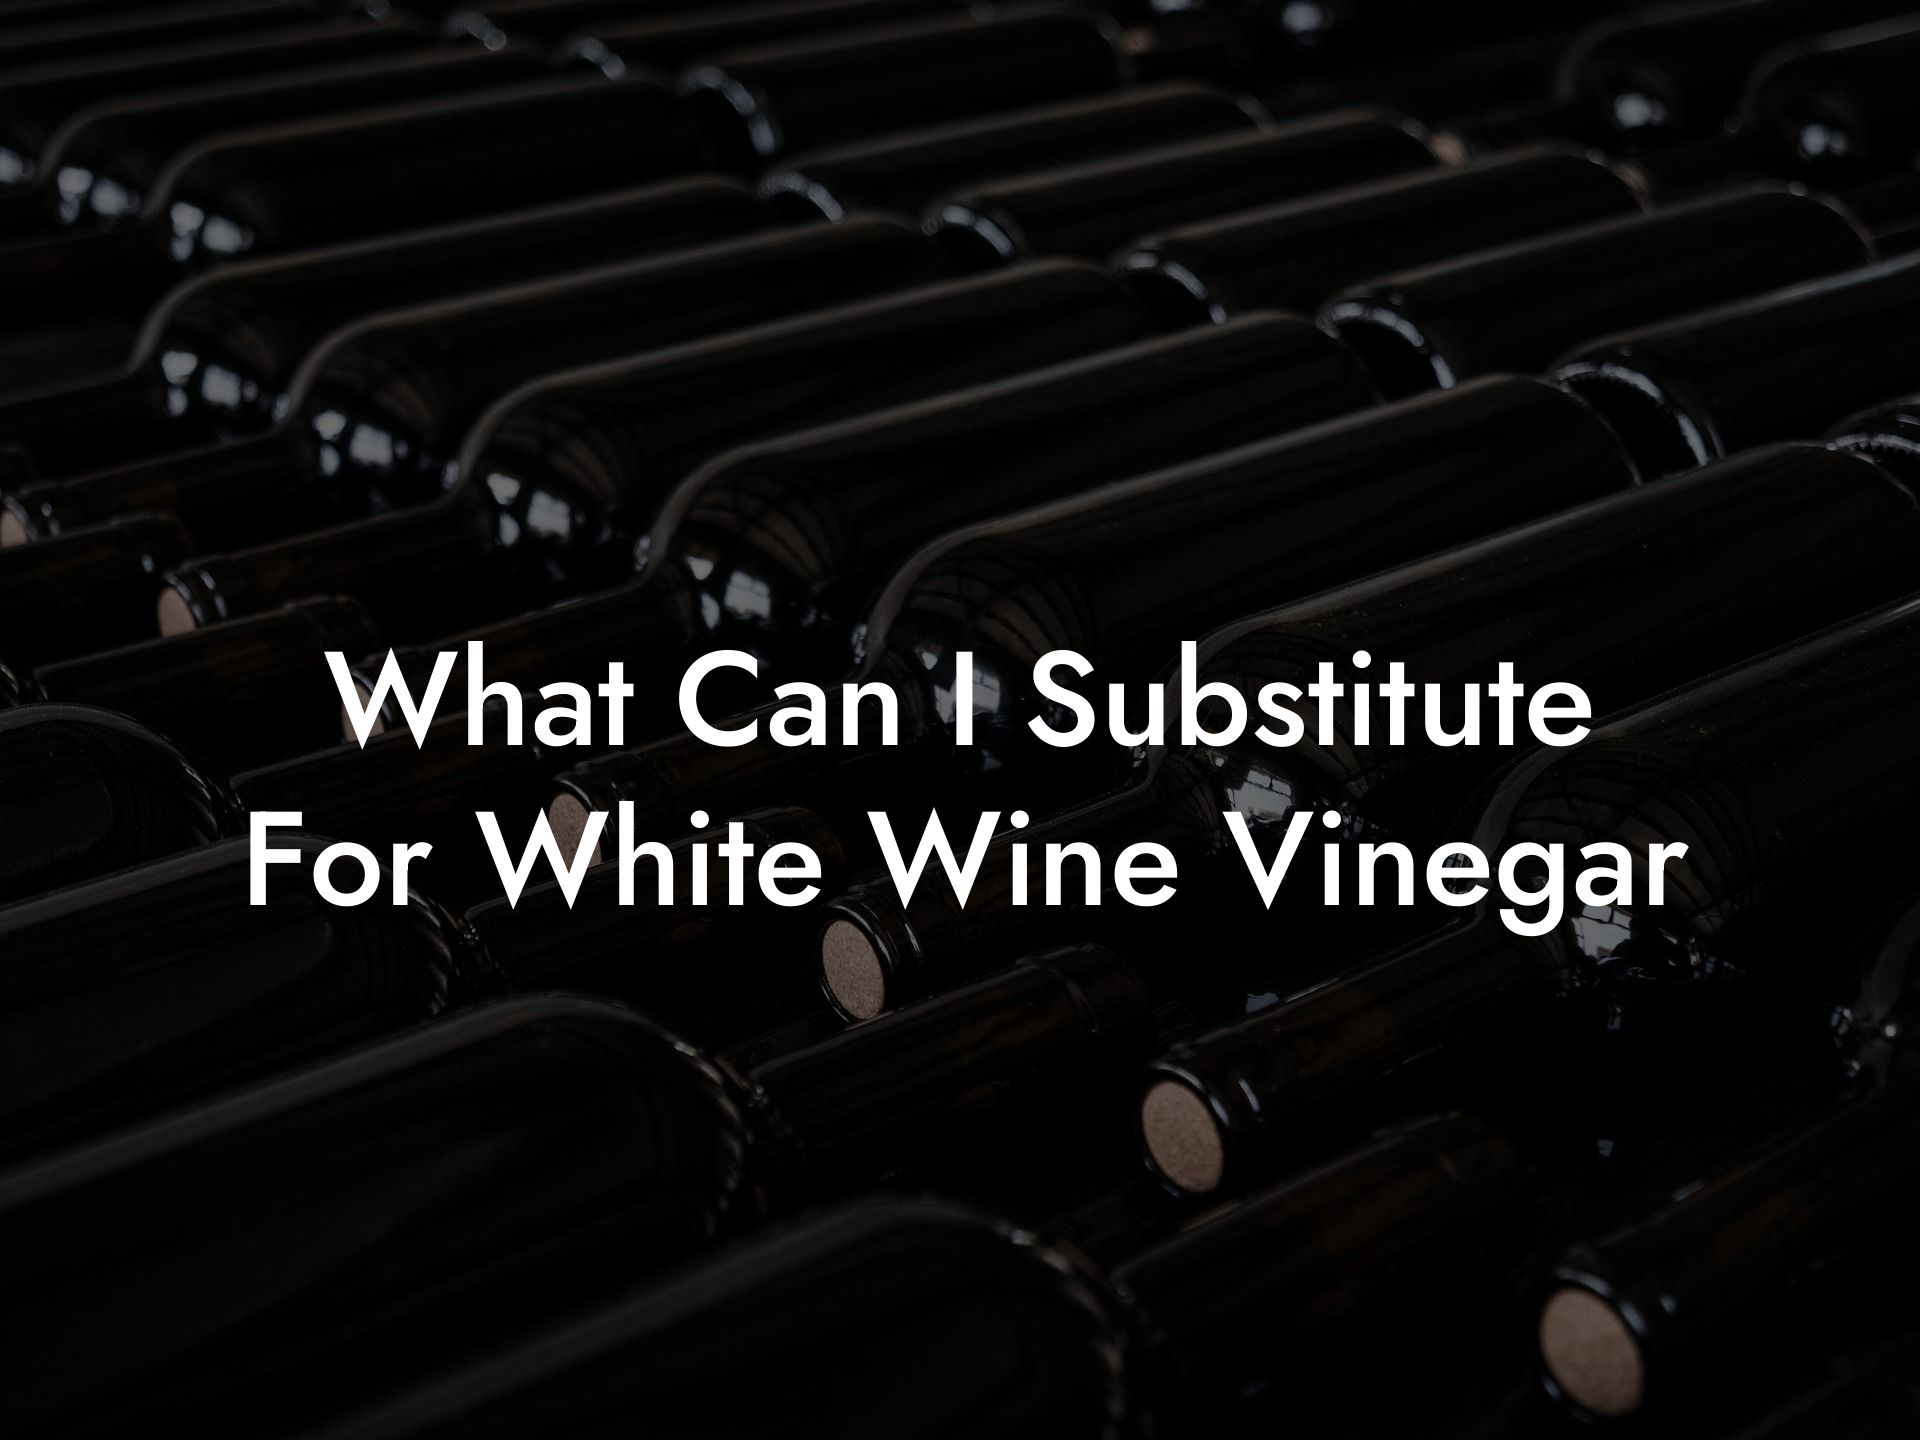 What Can I Substitute For White Wine Vinegar